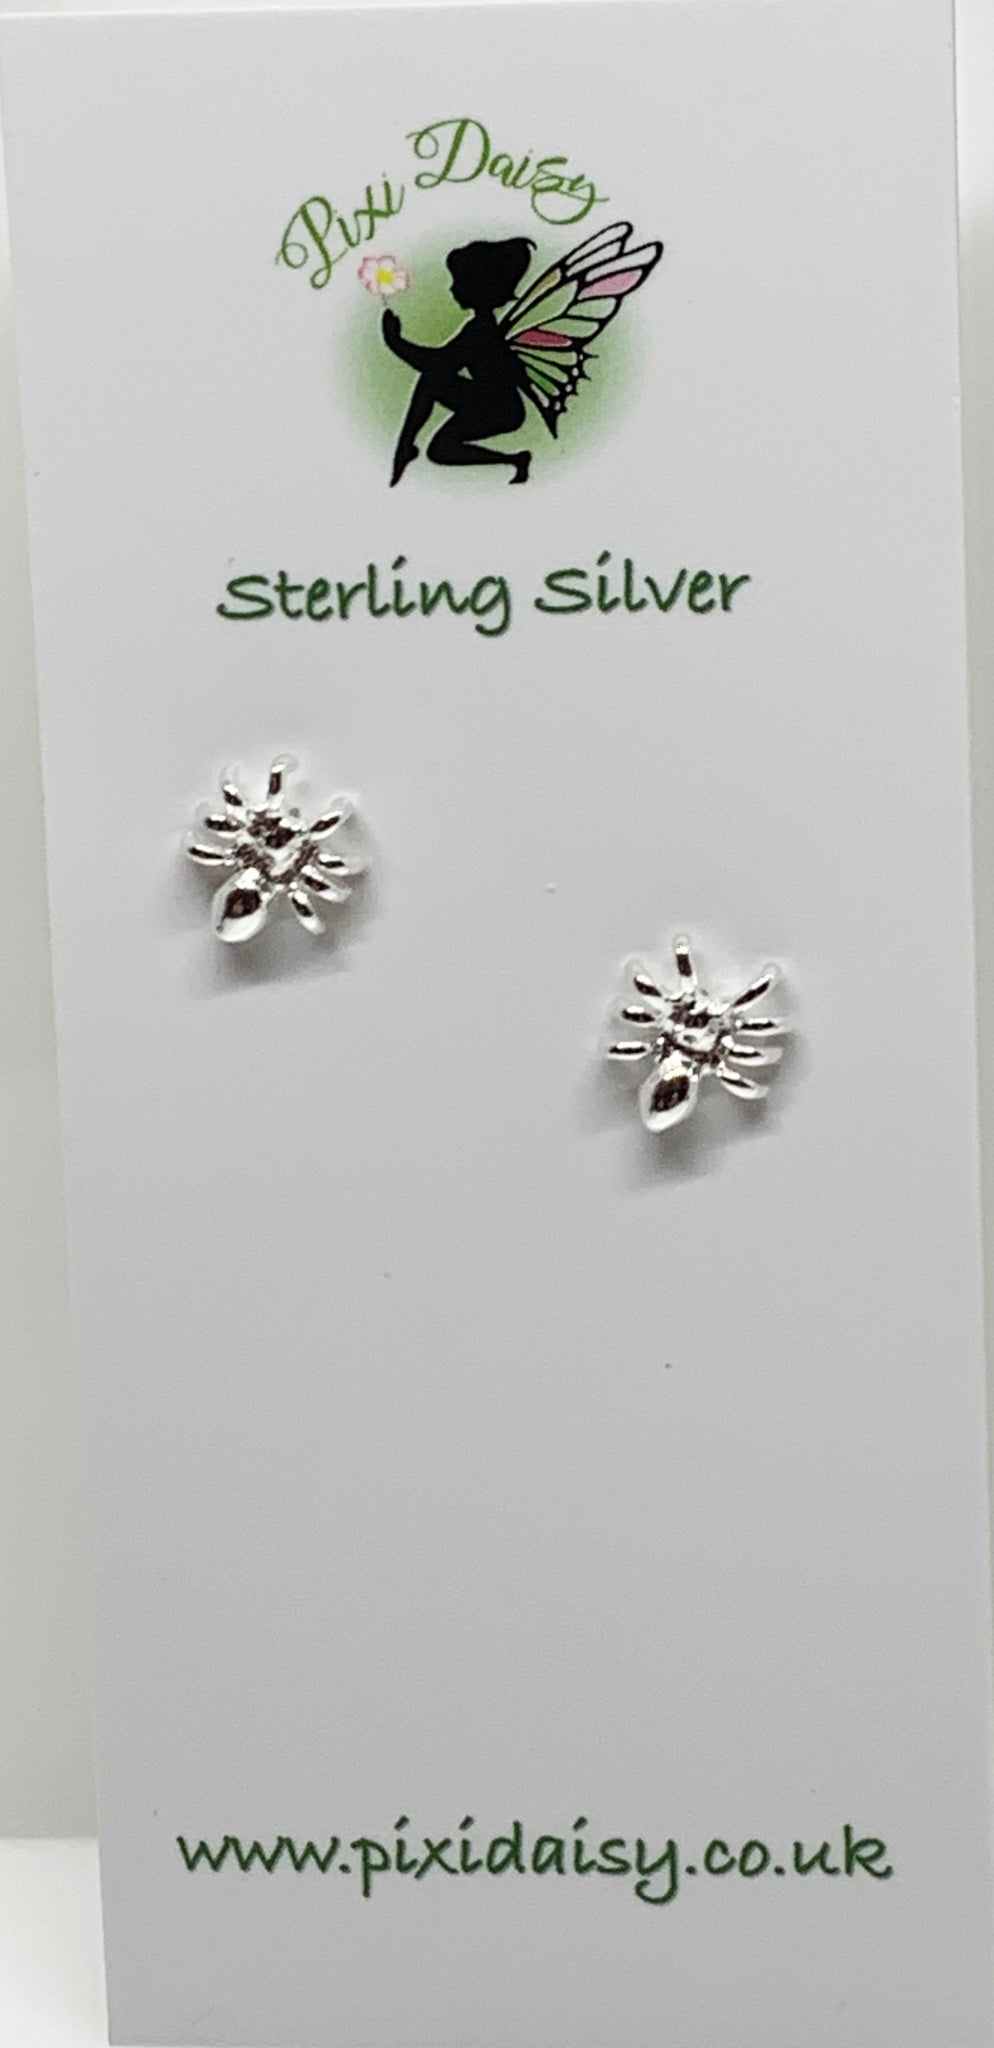 Silver Spider ear Studs from Pixi Daisy